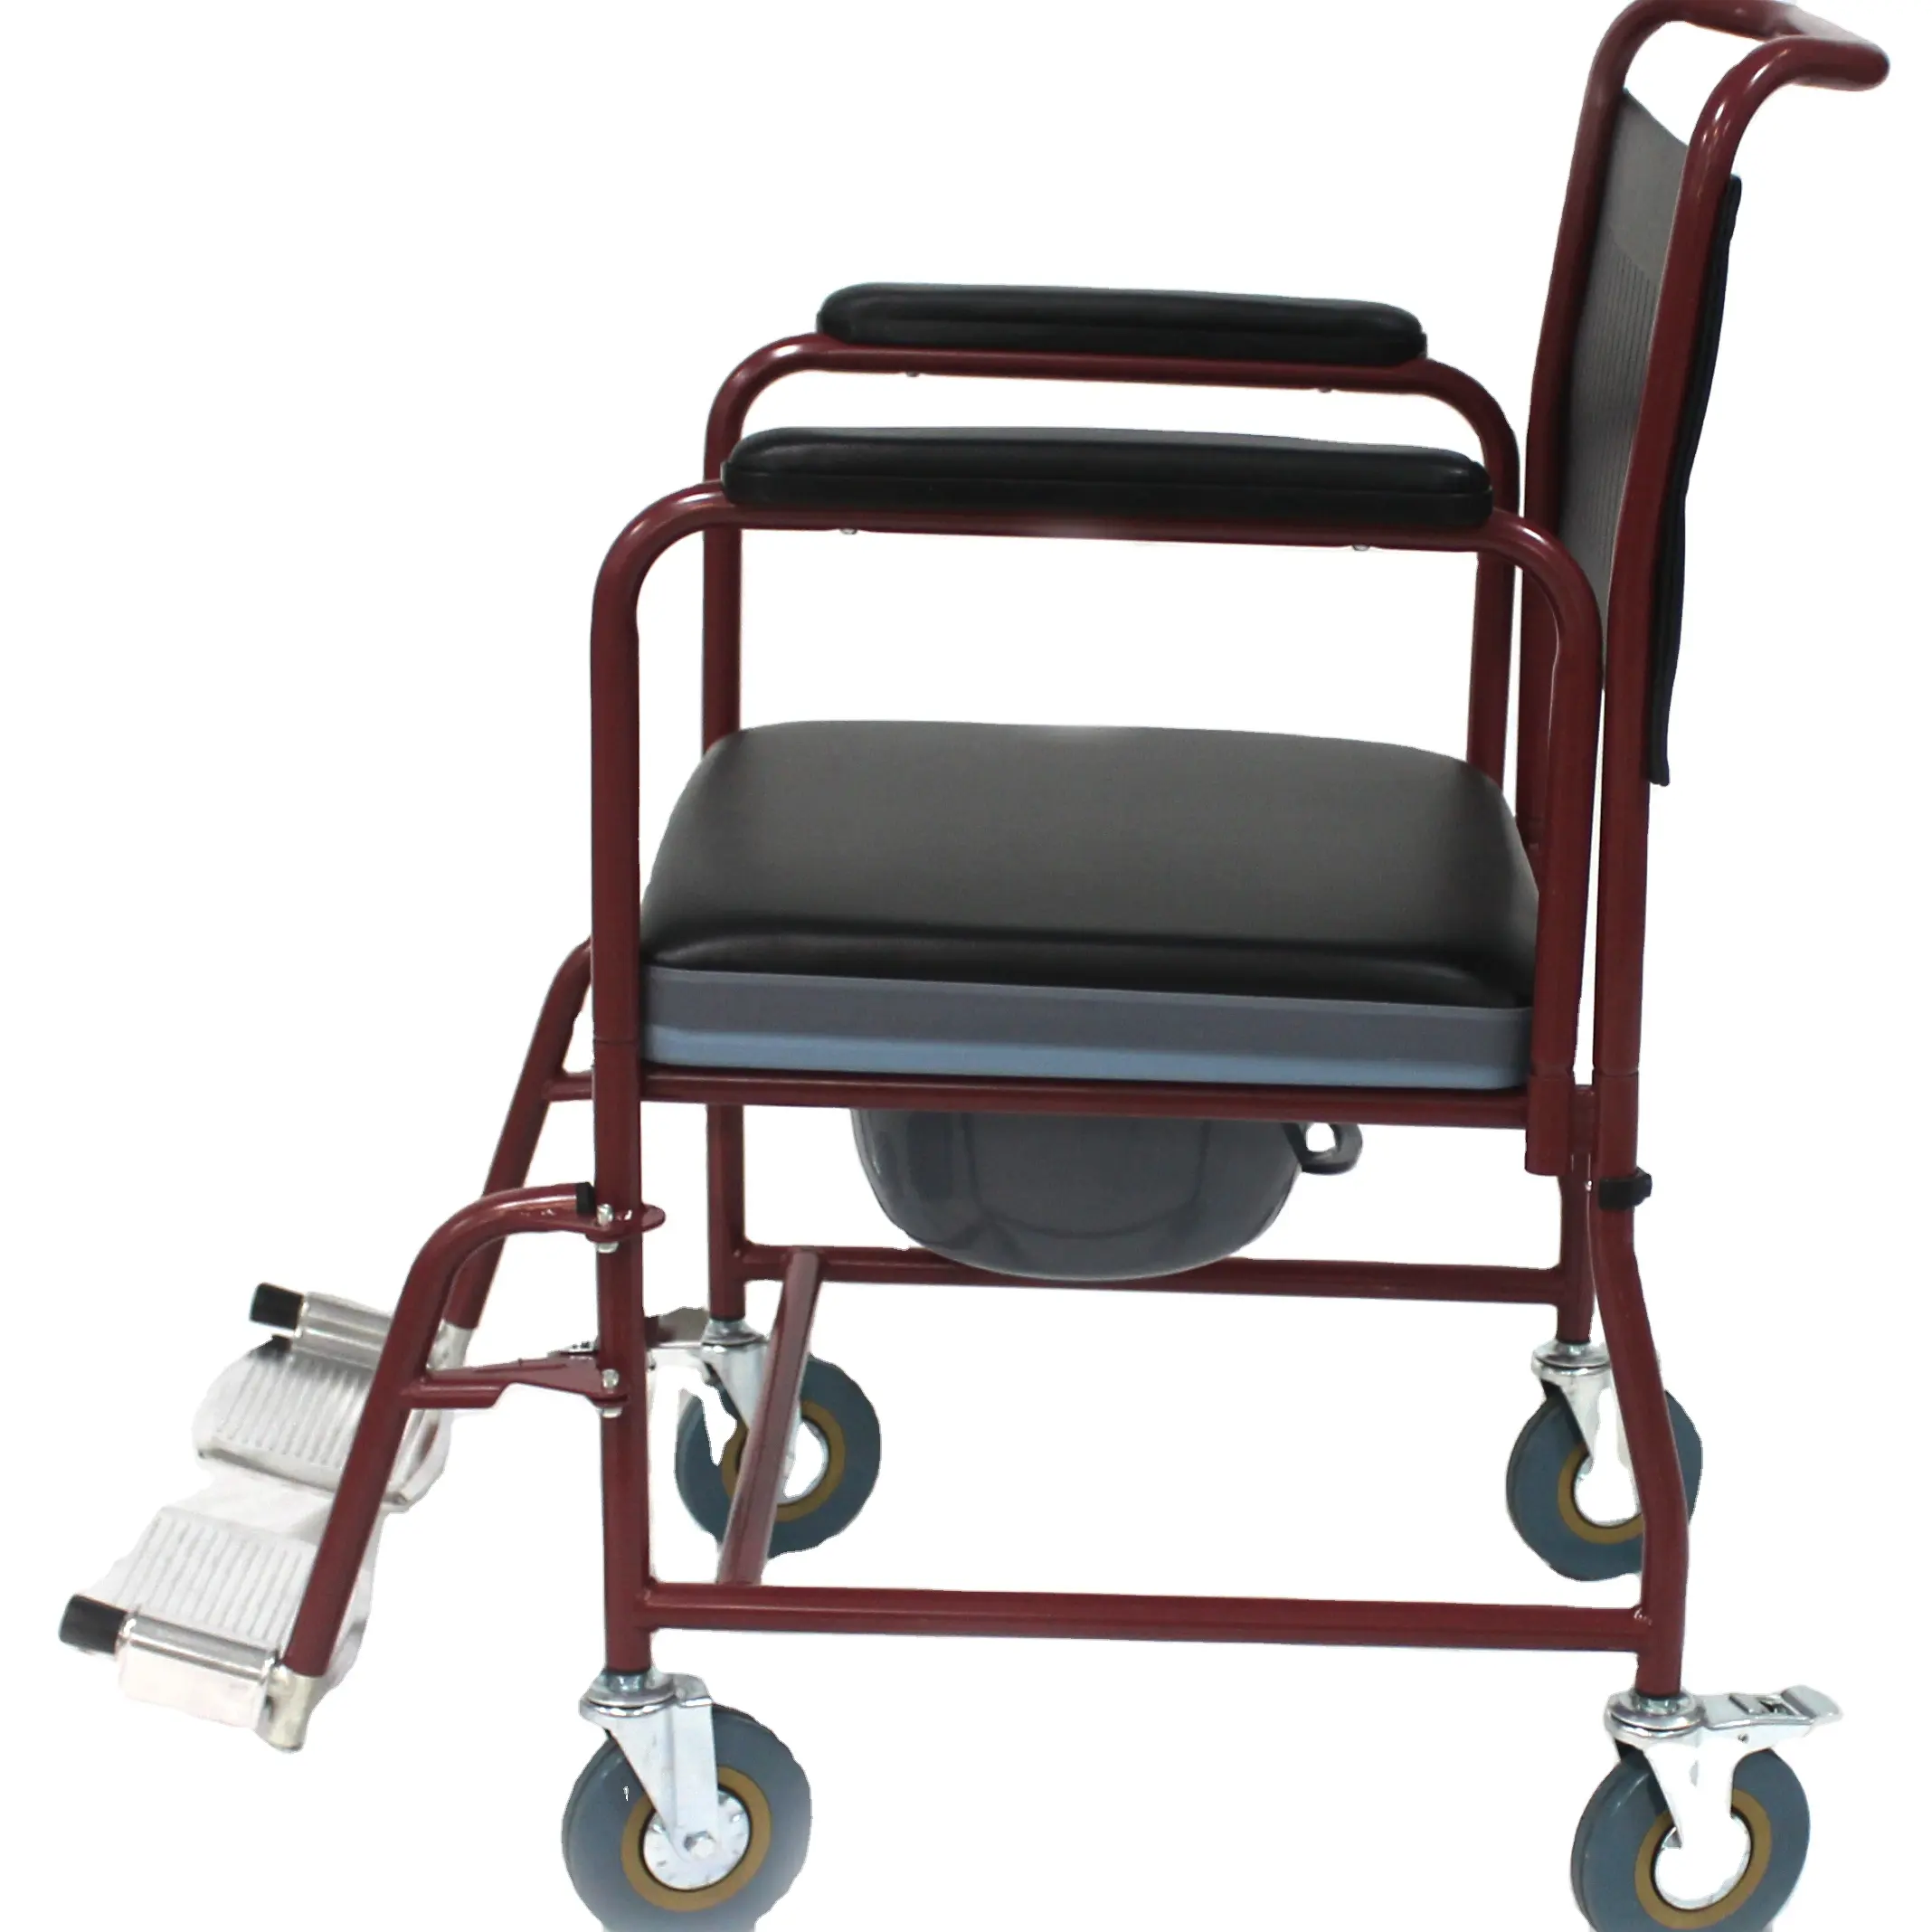 Latest model commode chair for elderly design wheelchair hospital chairs bathroom other tricycles adults disabled equipment